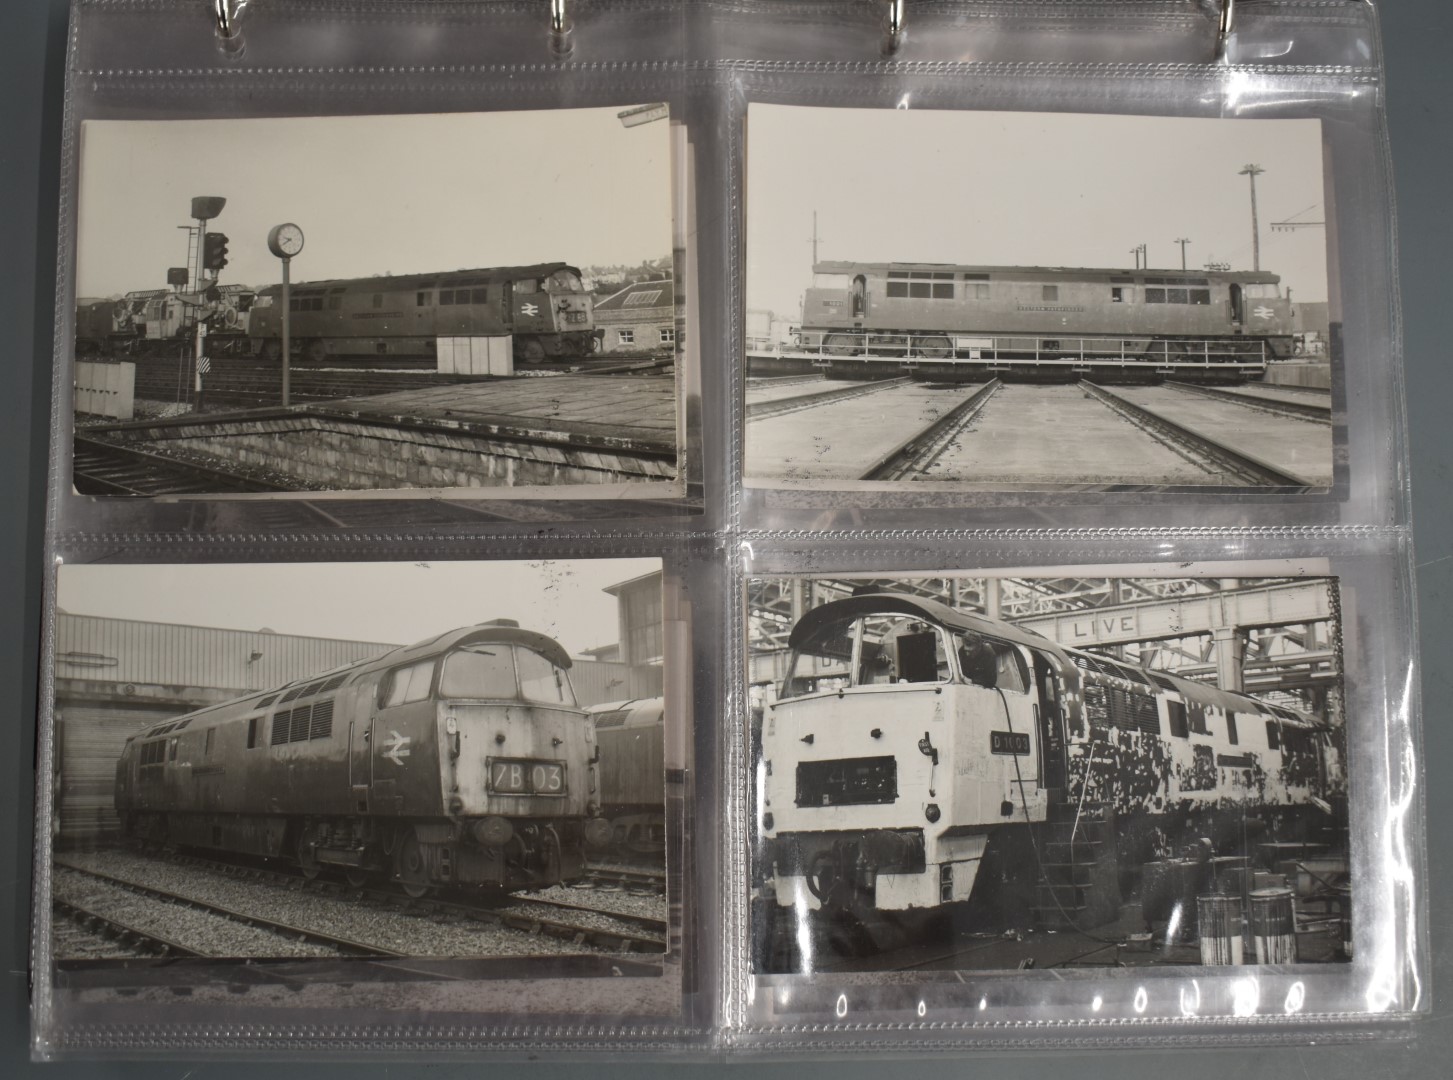 Seventy four vintage black and white 6 x 4 inch photographs of British Rail class 52 "Western"